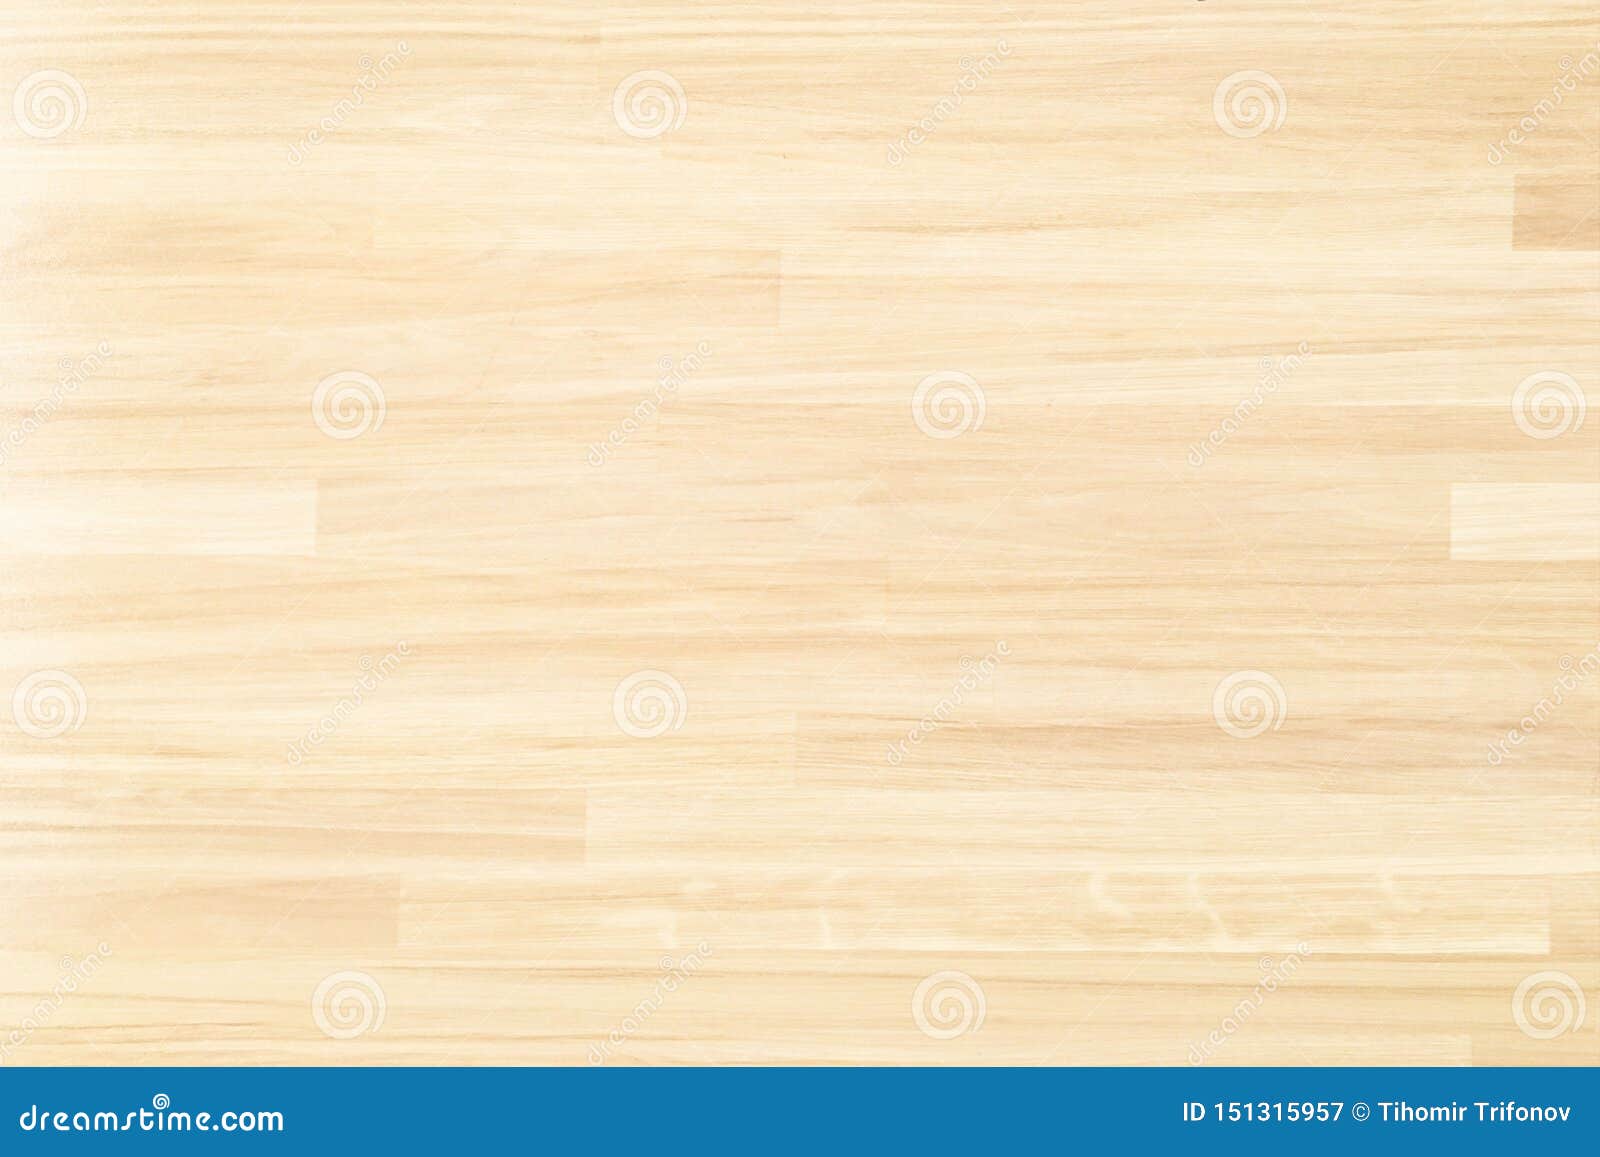 Brown Wood Texture, Light Wooden Abstract Background Stock Image ...